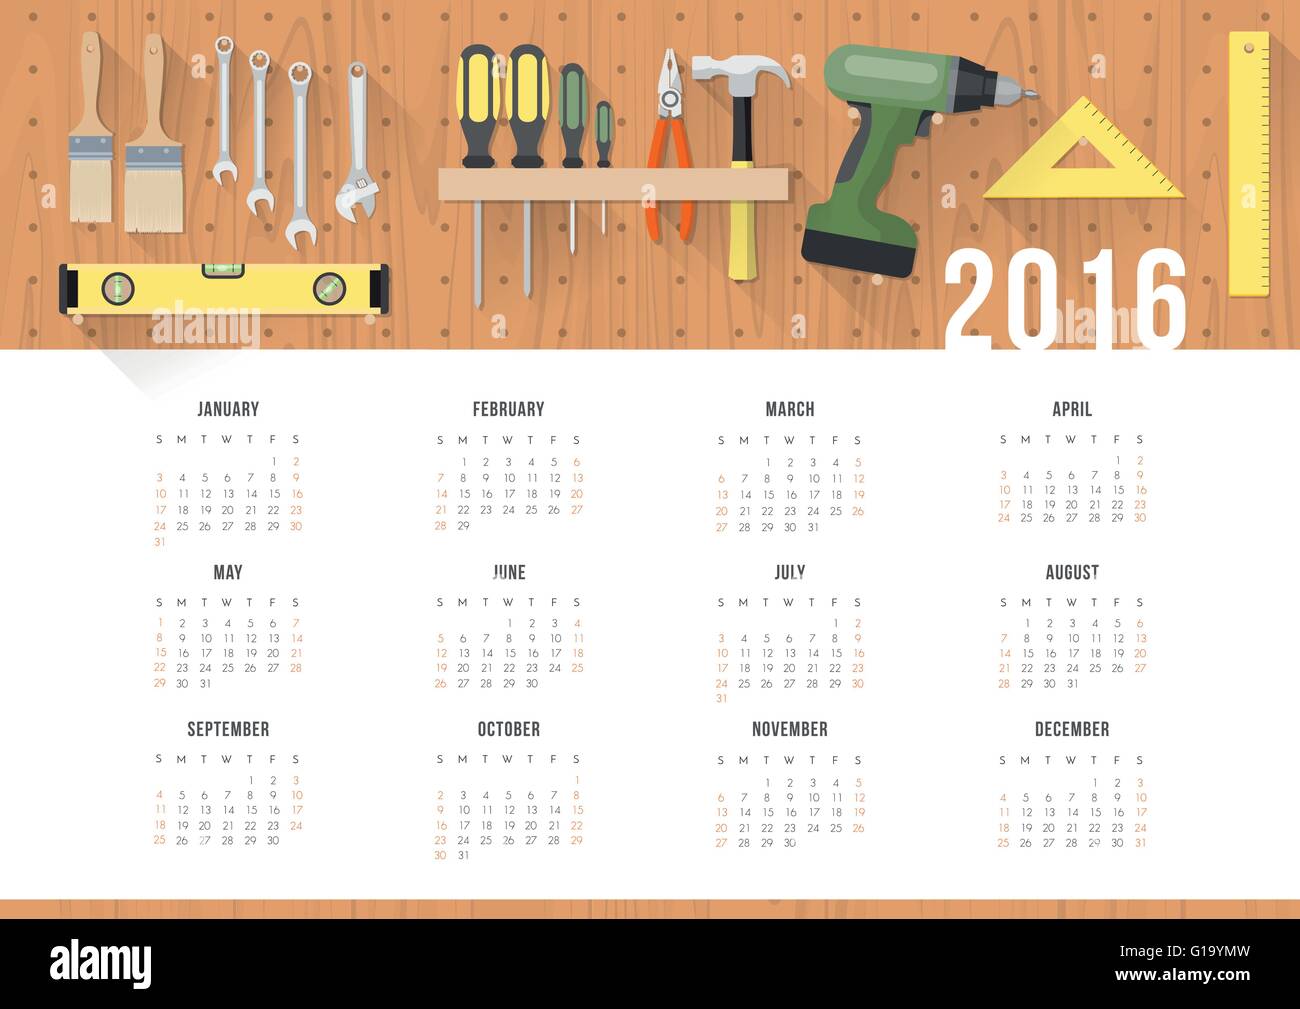 Diy and home renovation calendar 2016 with work hardware tools hanging on a pegboard Stock Vector